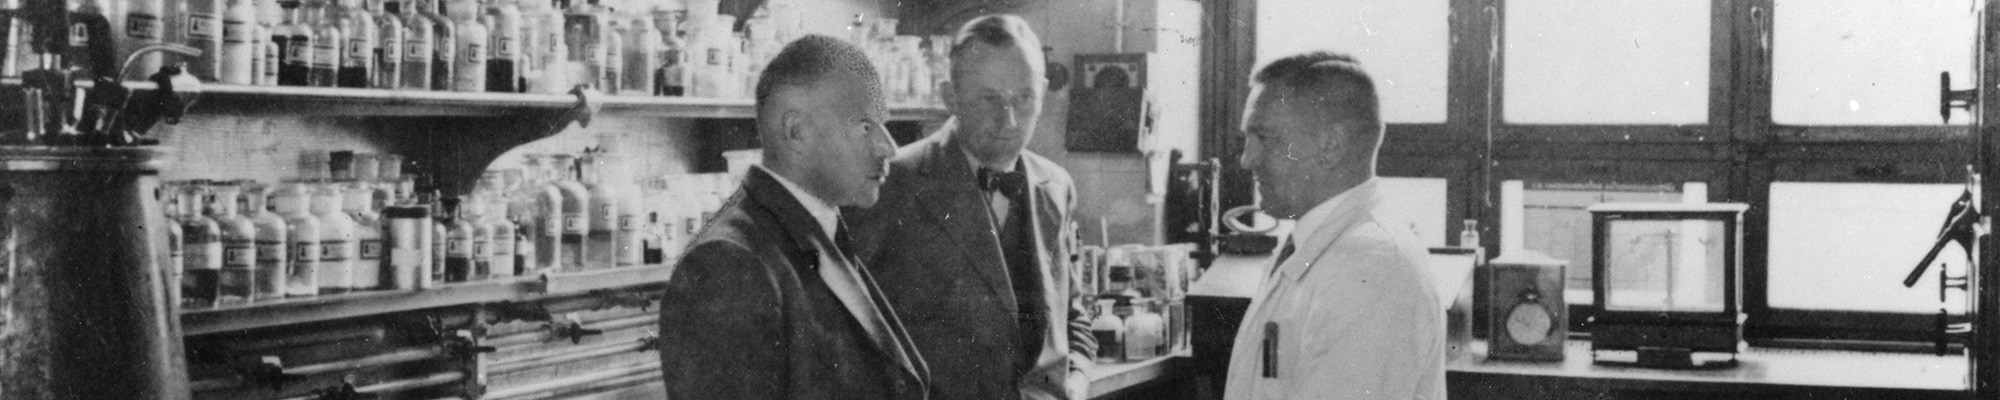 Original picture from the Bayer archives of Dr Hans Finkelstein conversing with colleagues in a laboratory at the Uerdingen site of I.G. Farben, recorded in 1932.